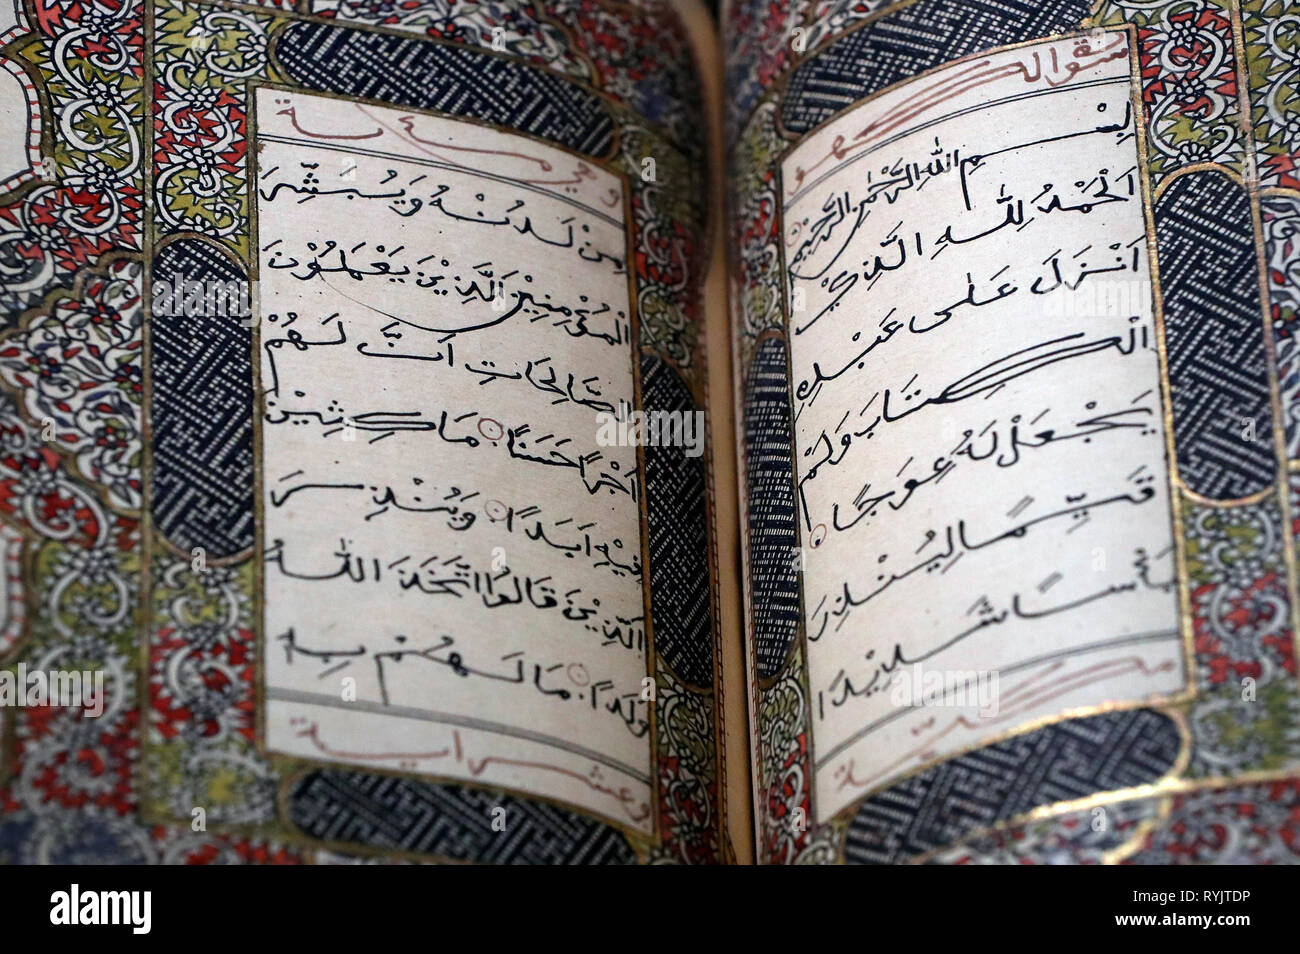 Asian Civilisations Museum.  Illuminated Quran from the Malay Indonesian Archipelago. Central Java. Late 19th century.  Singapore. Stock Photo